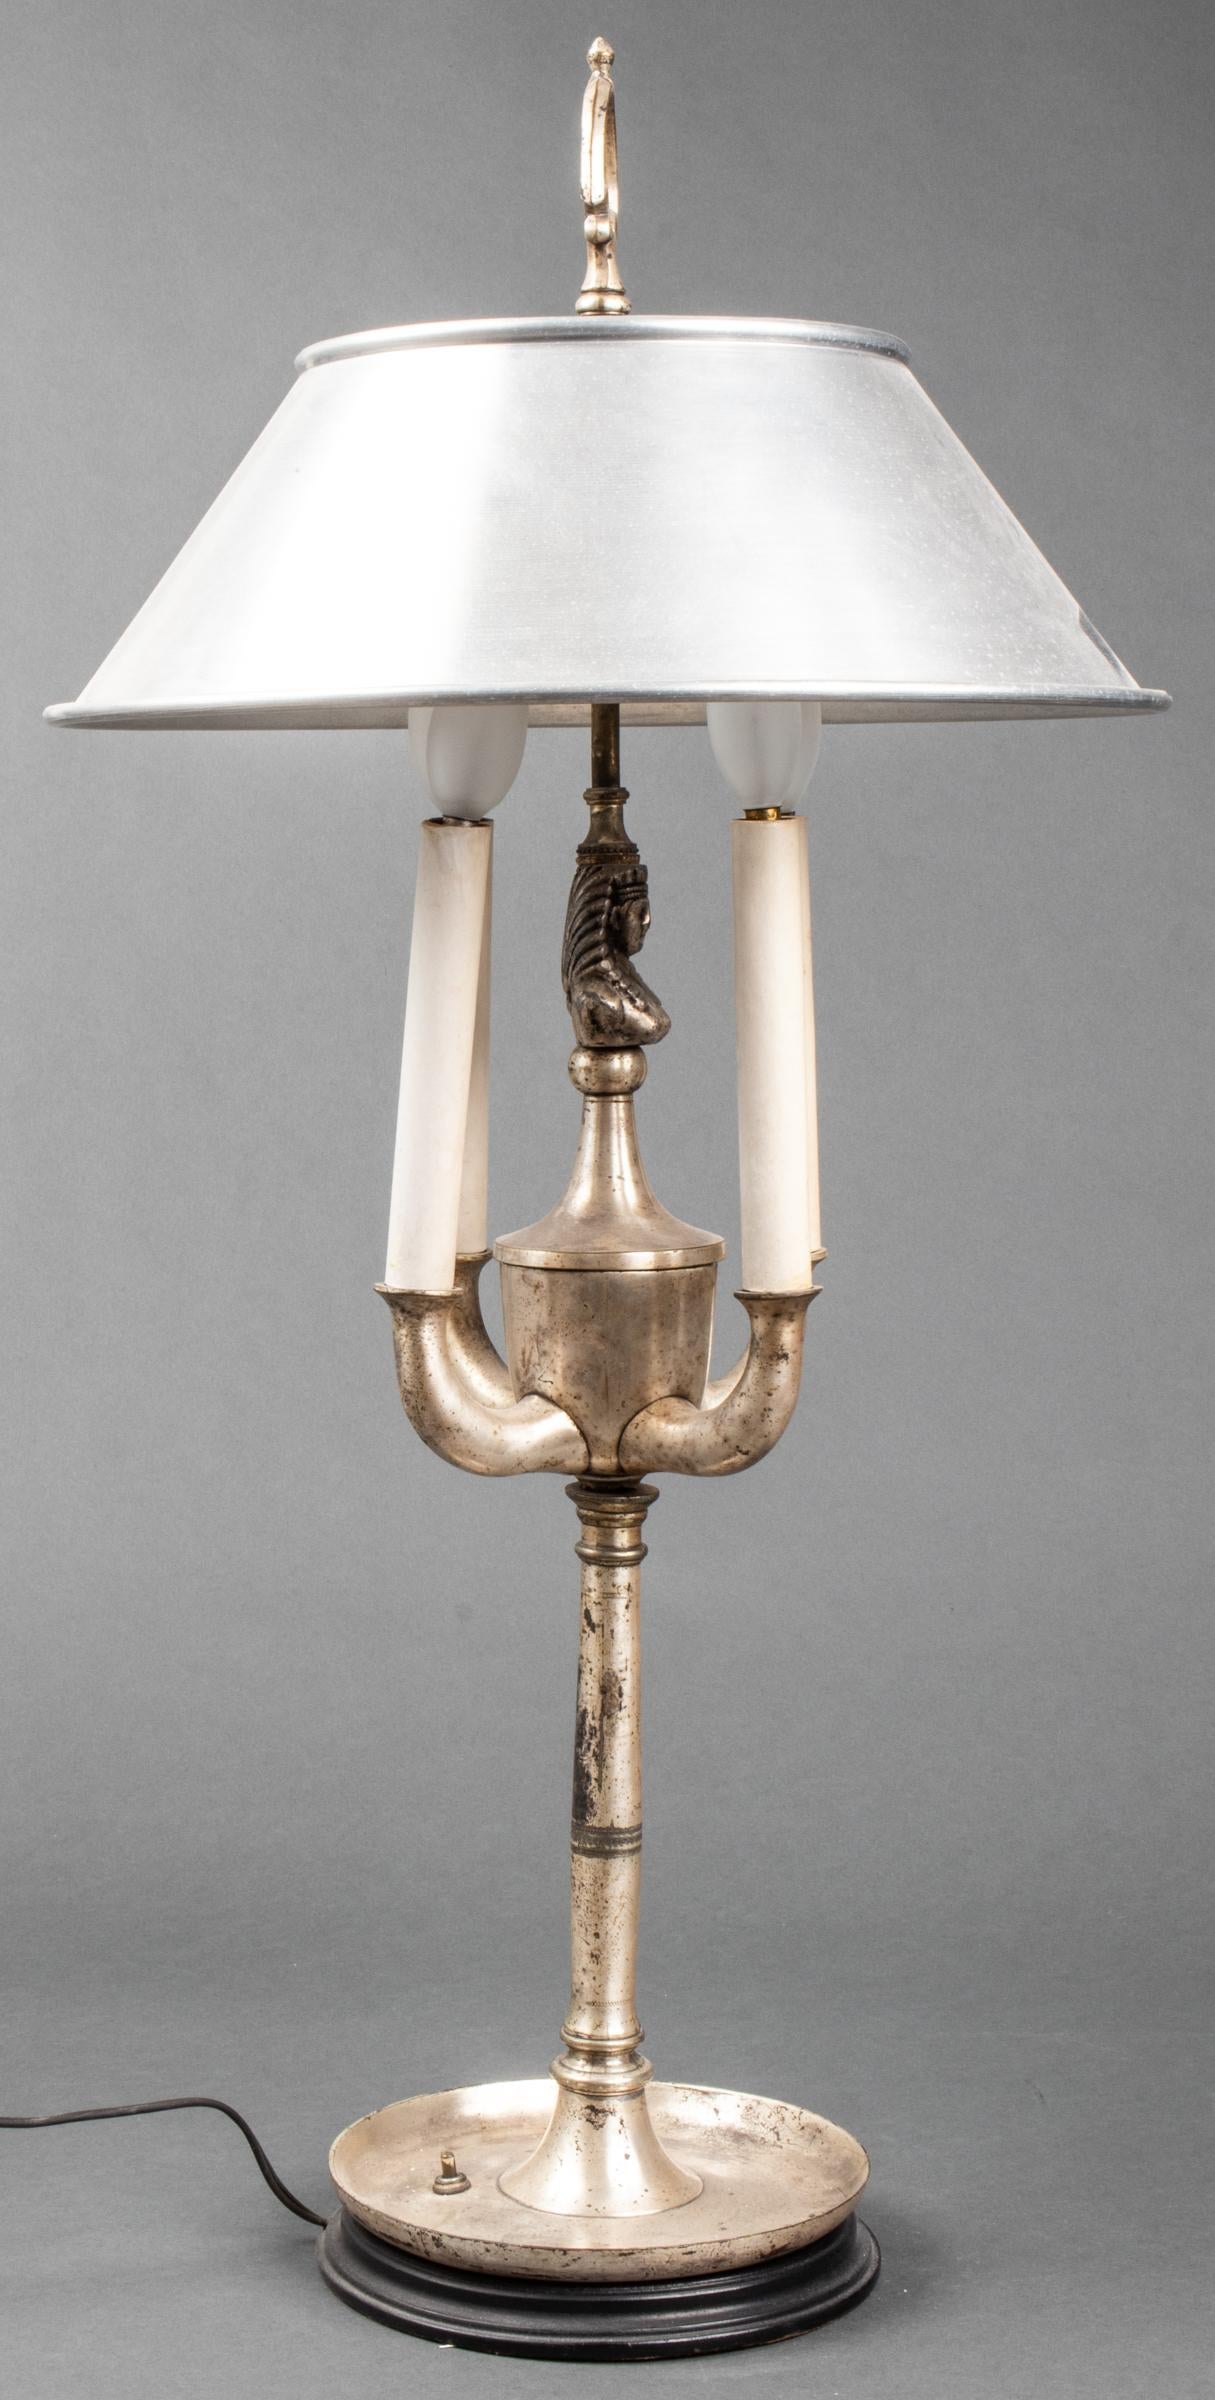 20th Century Egyptian Revival Style Table Lamp For Sale